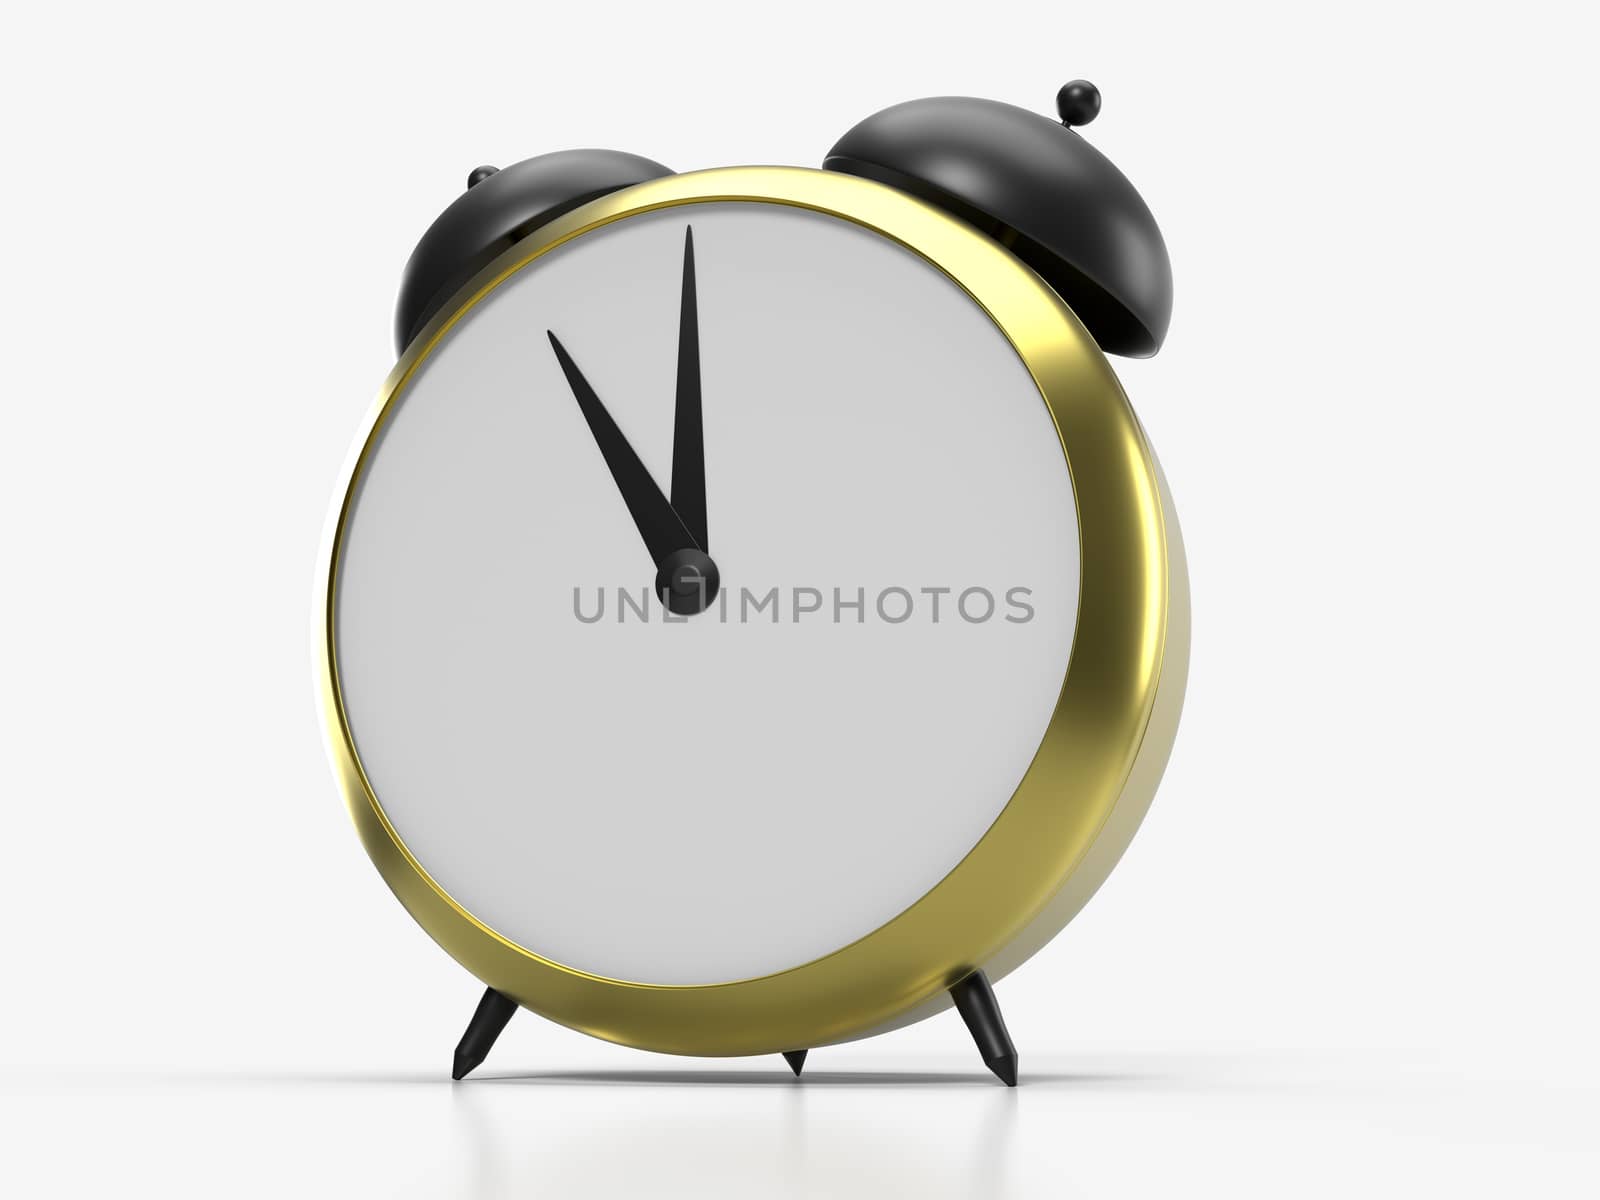 Alarm clock on white background. 11 O'Clock, am or pm. 3D rendering